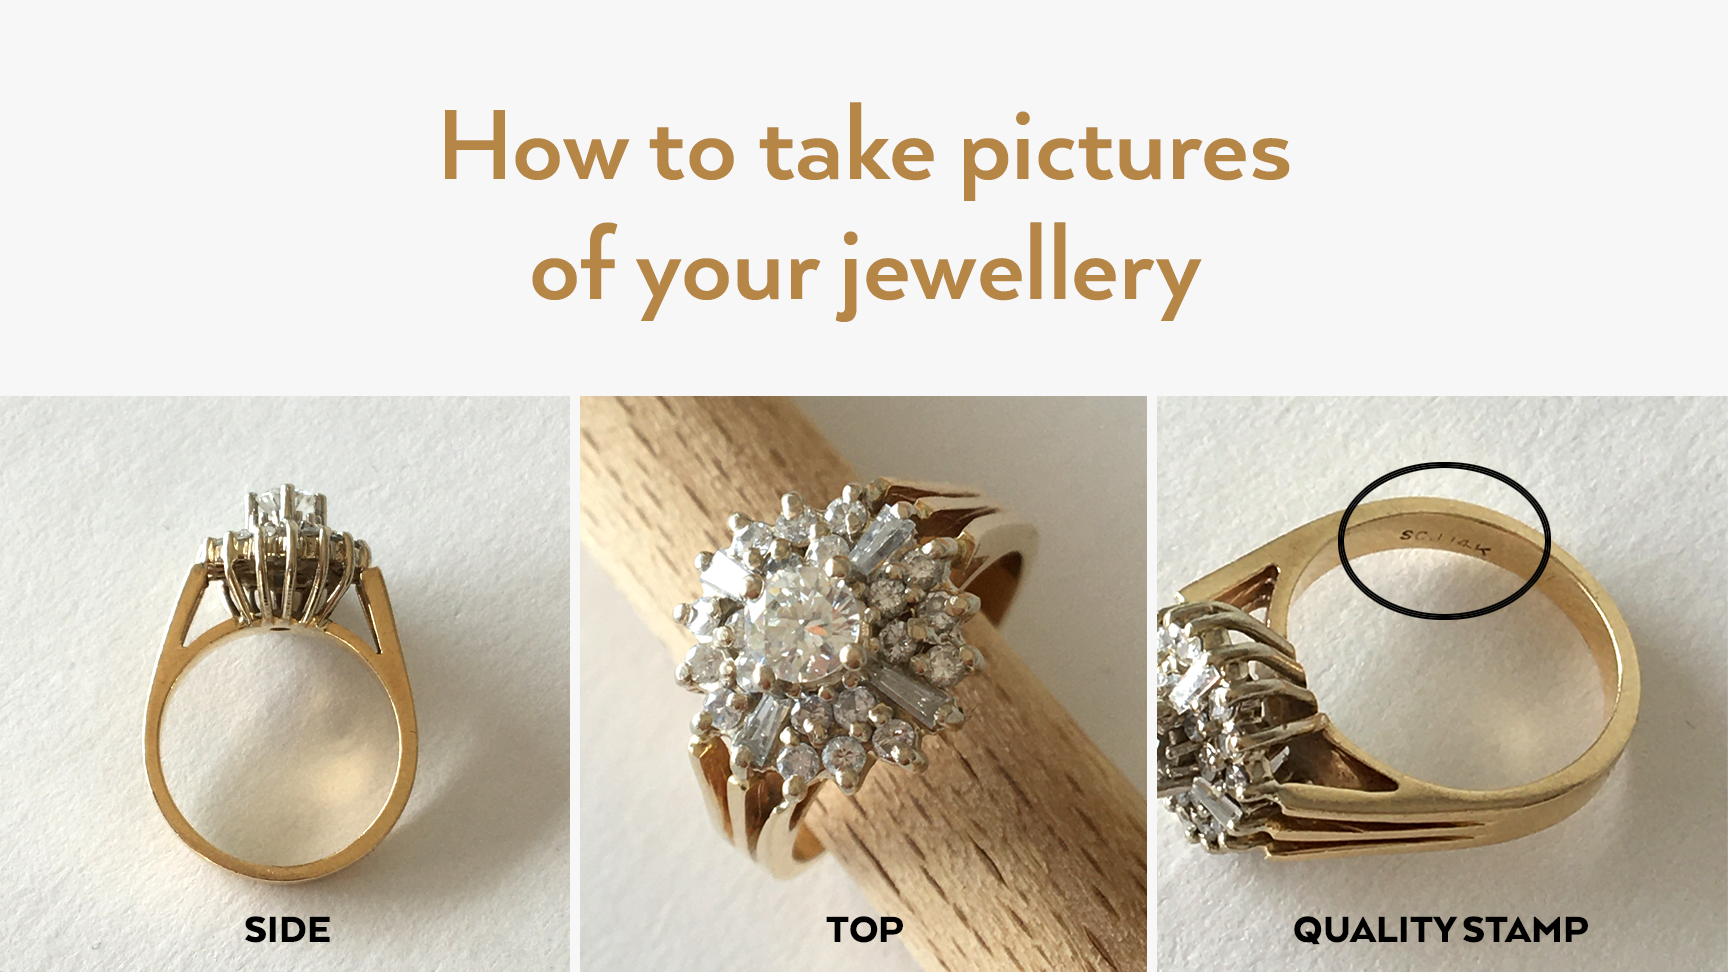 Load video: This video explains how to take pictures of your jewellery.